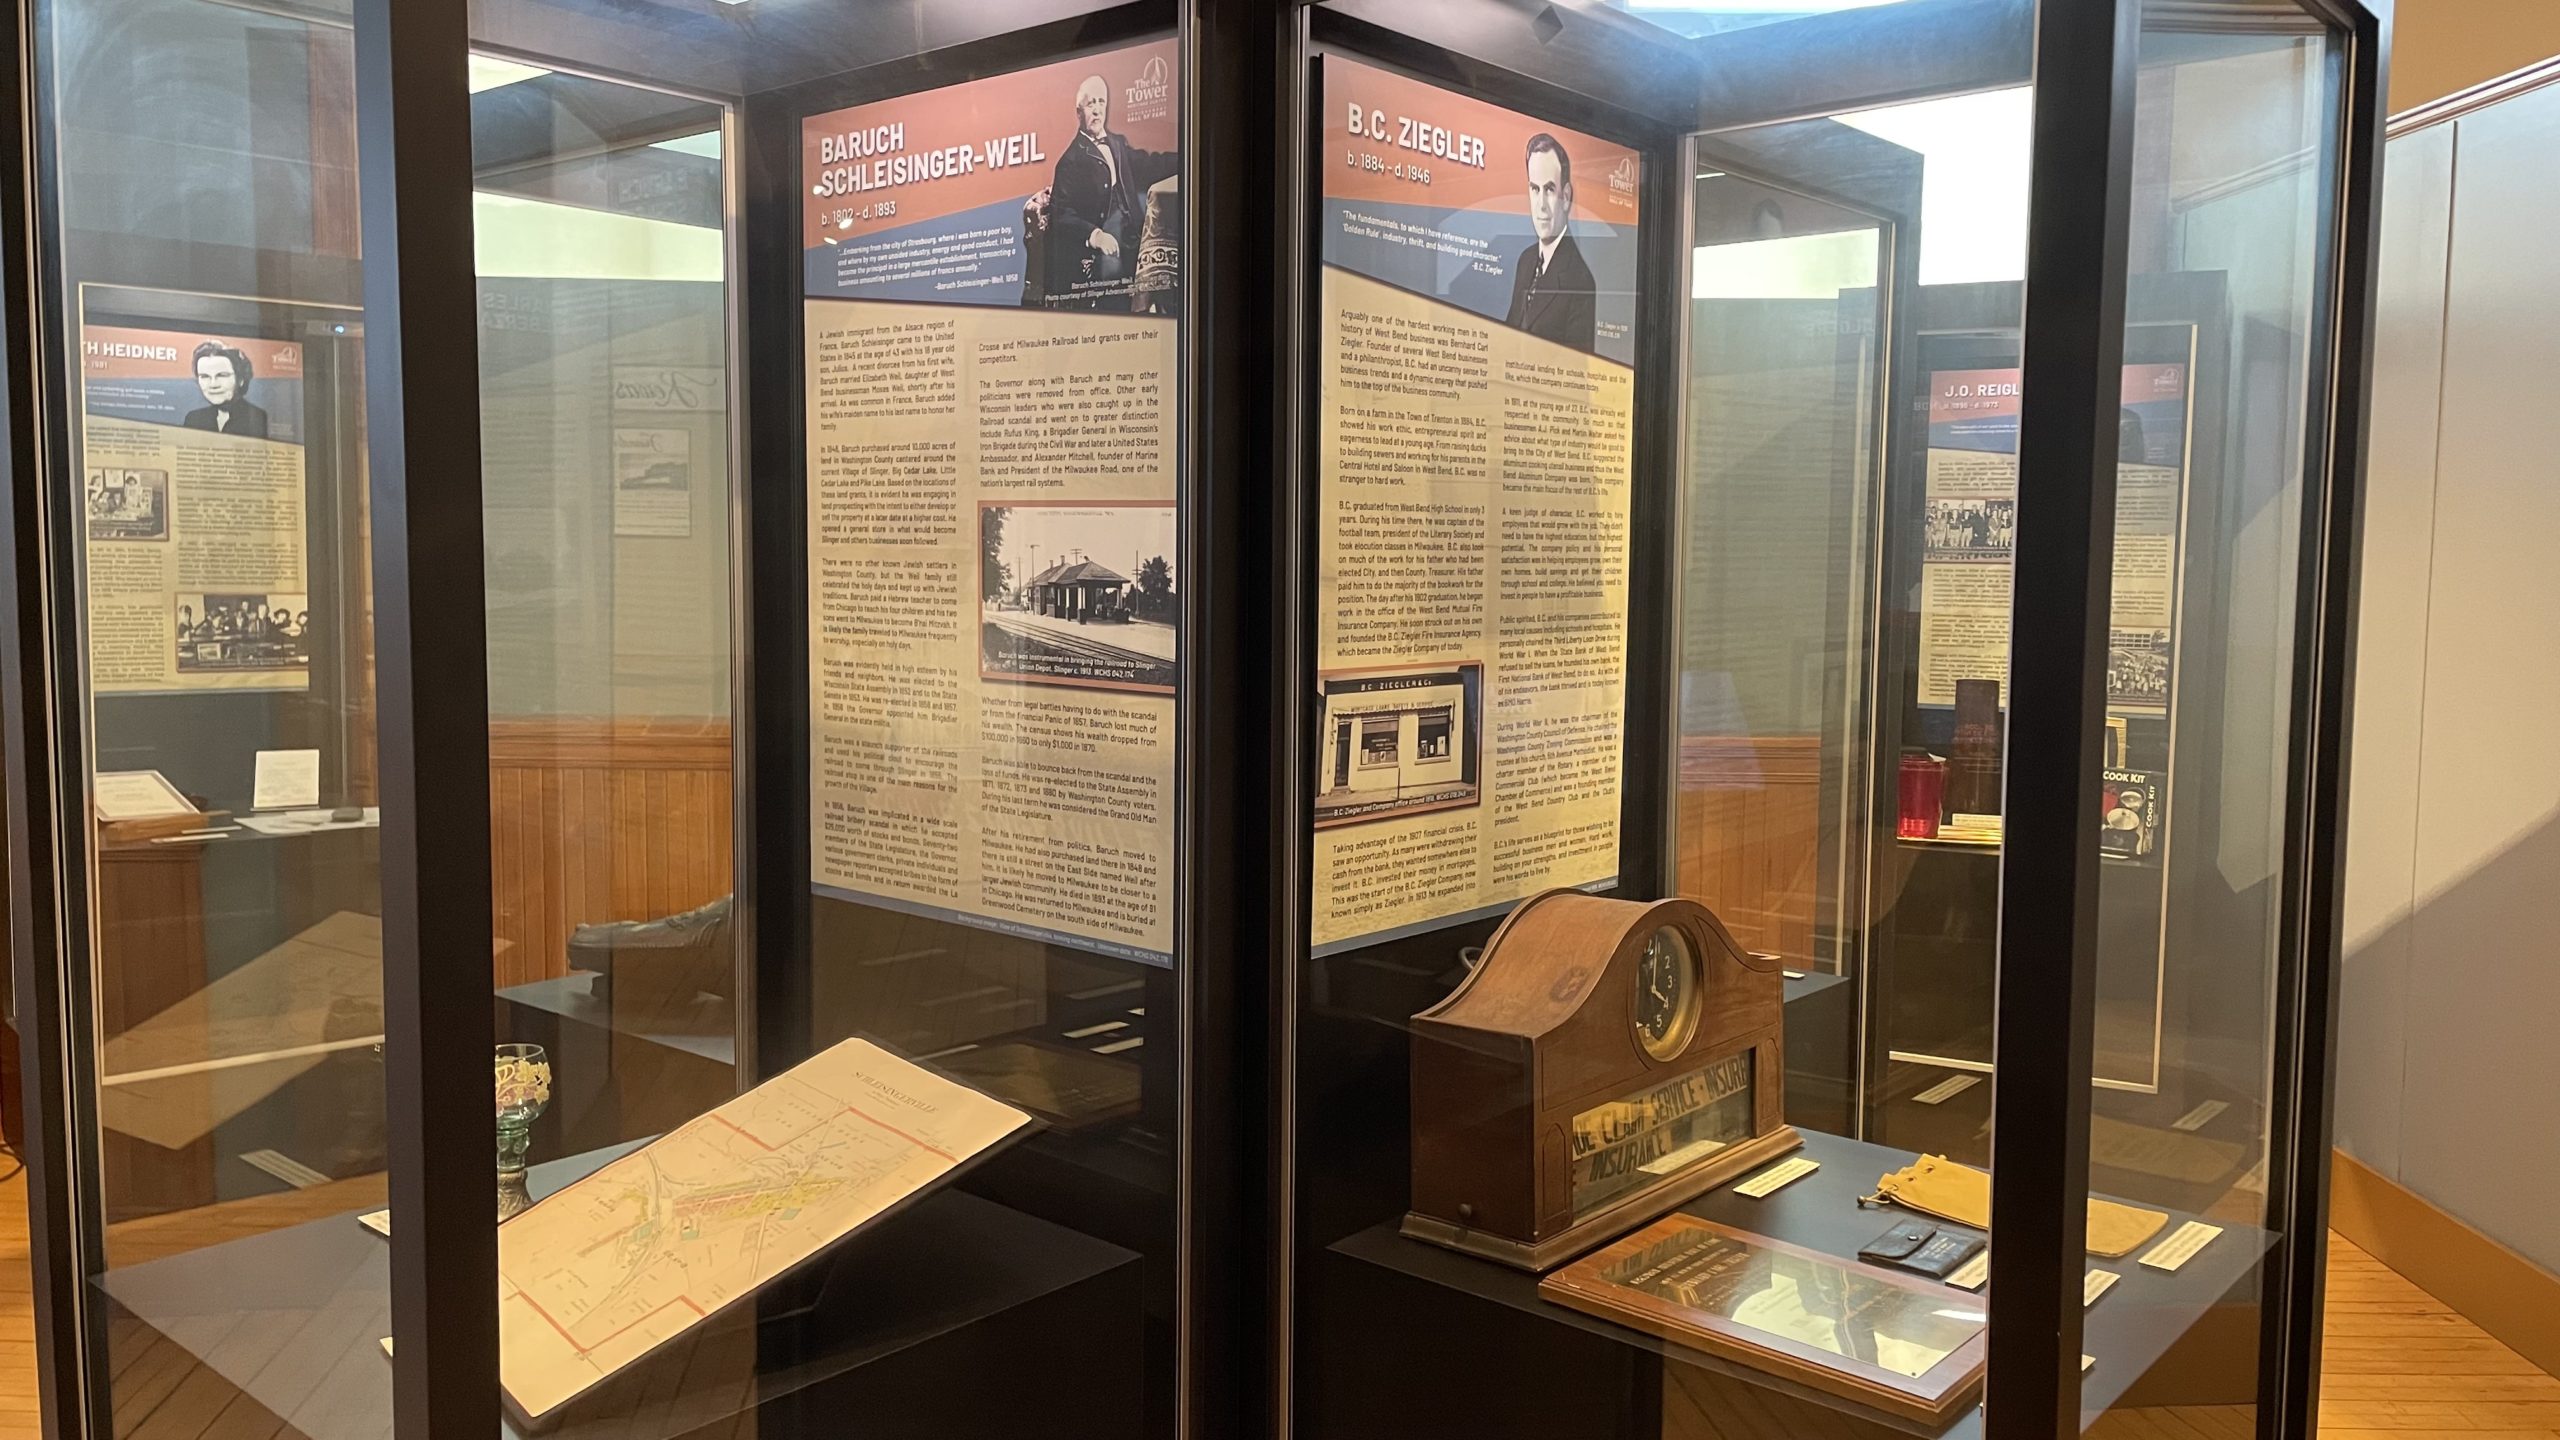 Display cases at the Towere Hertitage Center's Achievement Hall of Fame